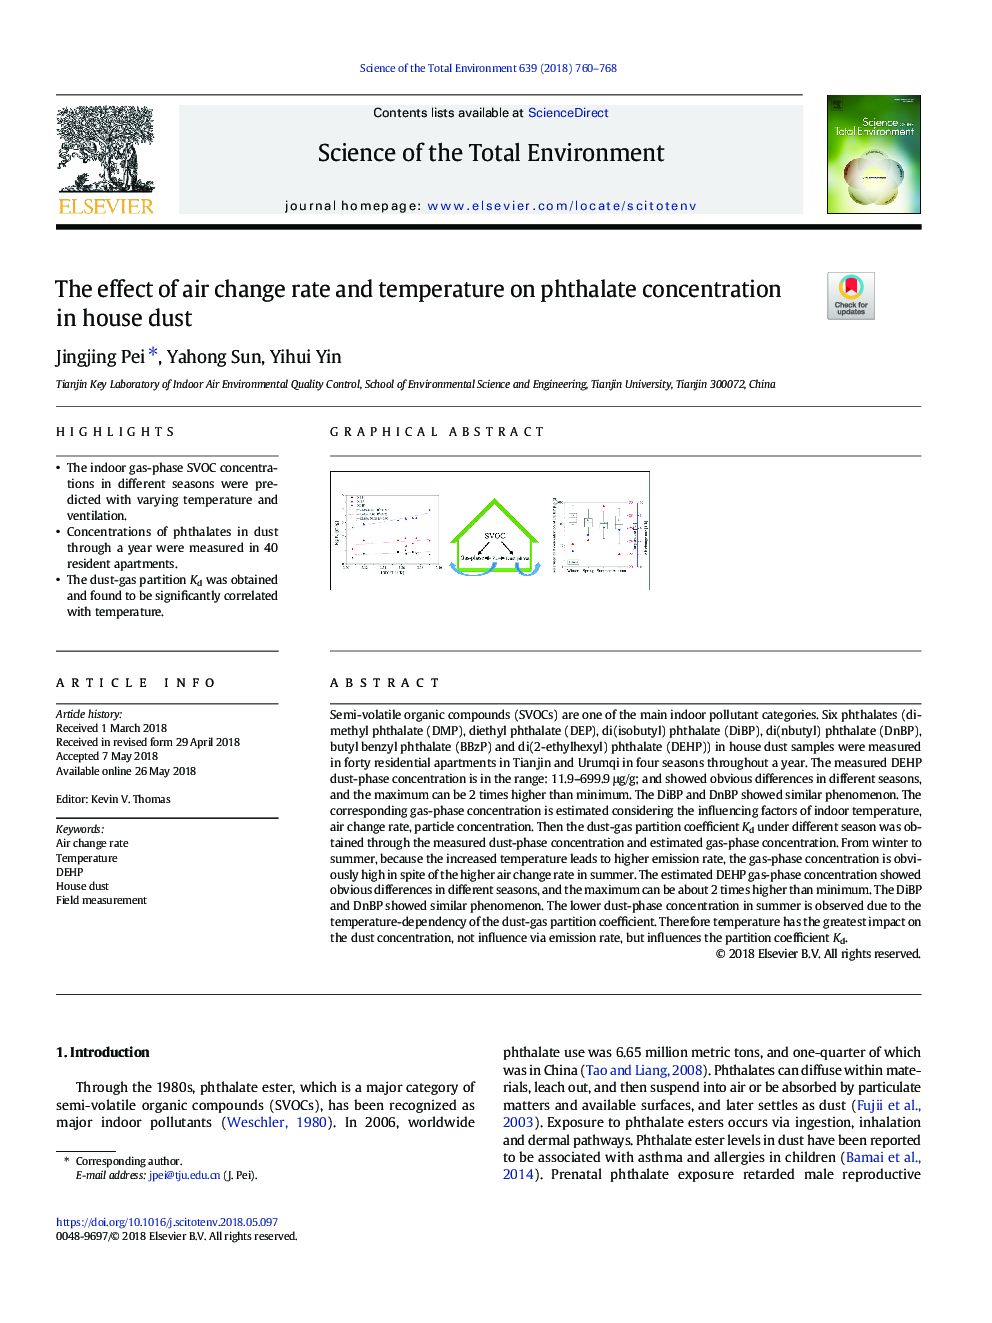 The effect of air change rate and temperature on phthalate concentration in house dust